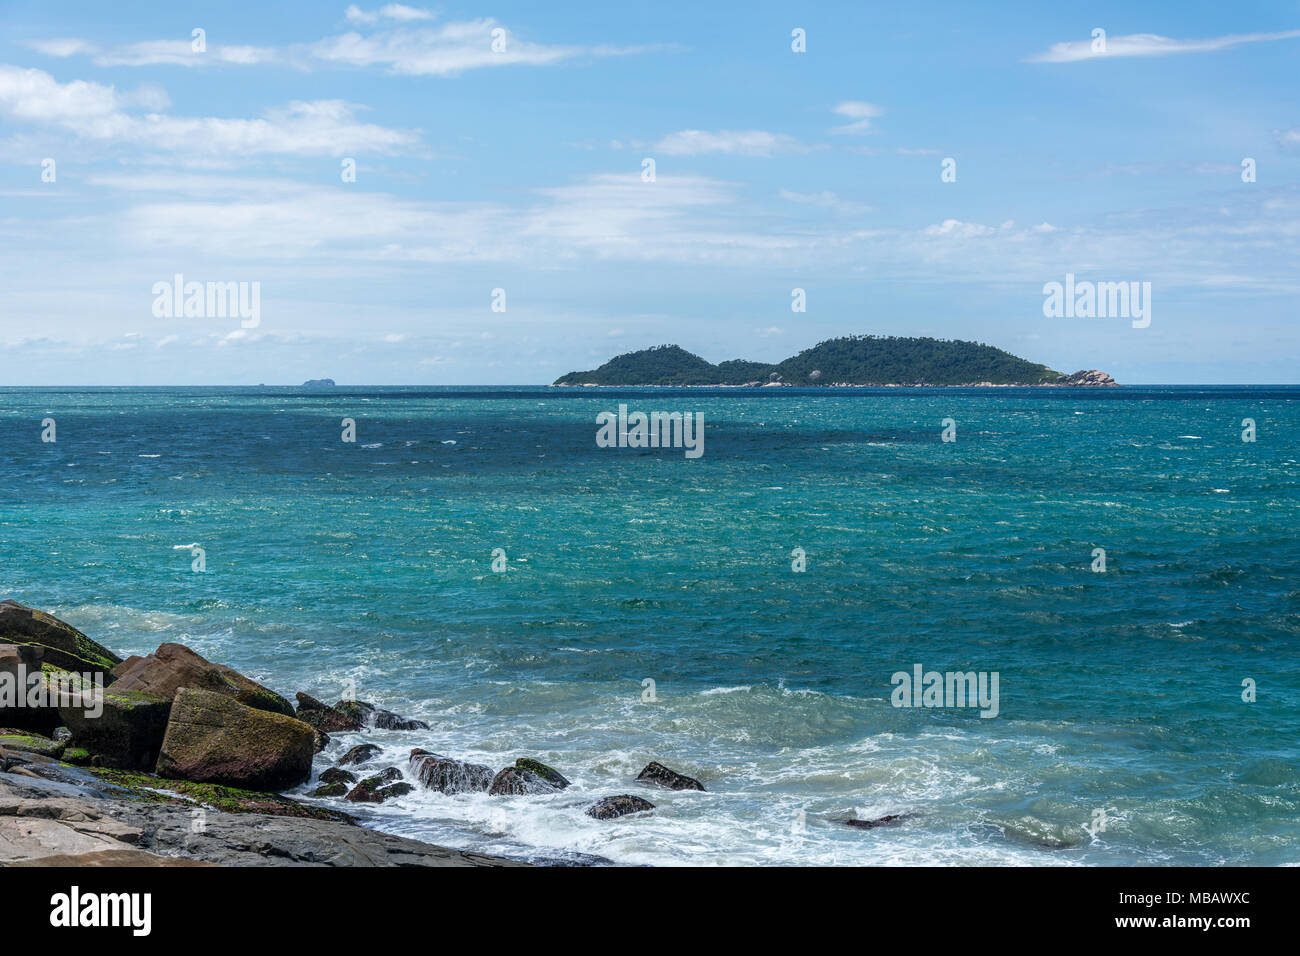 Florianopolis, Brazil. February, 2018. Sea and rocky region at the south of the island. At the backside of the image, the Campeche Island (Ilha do Cam Stock Photo